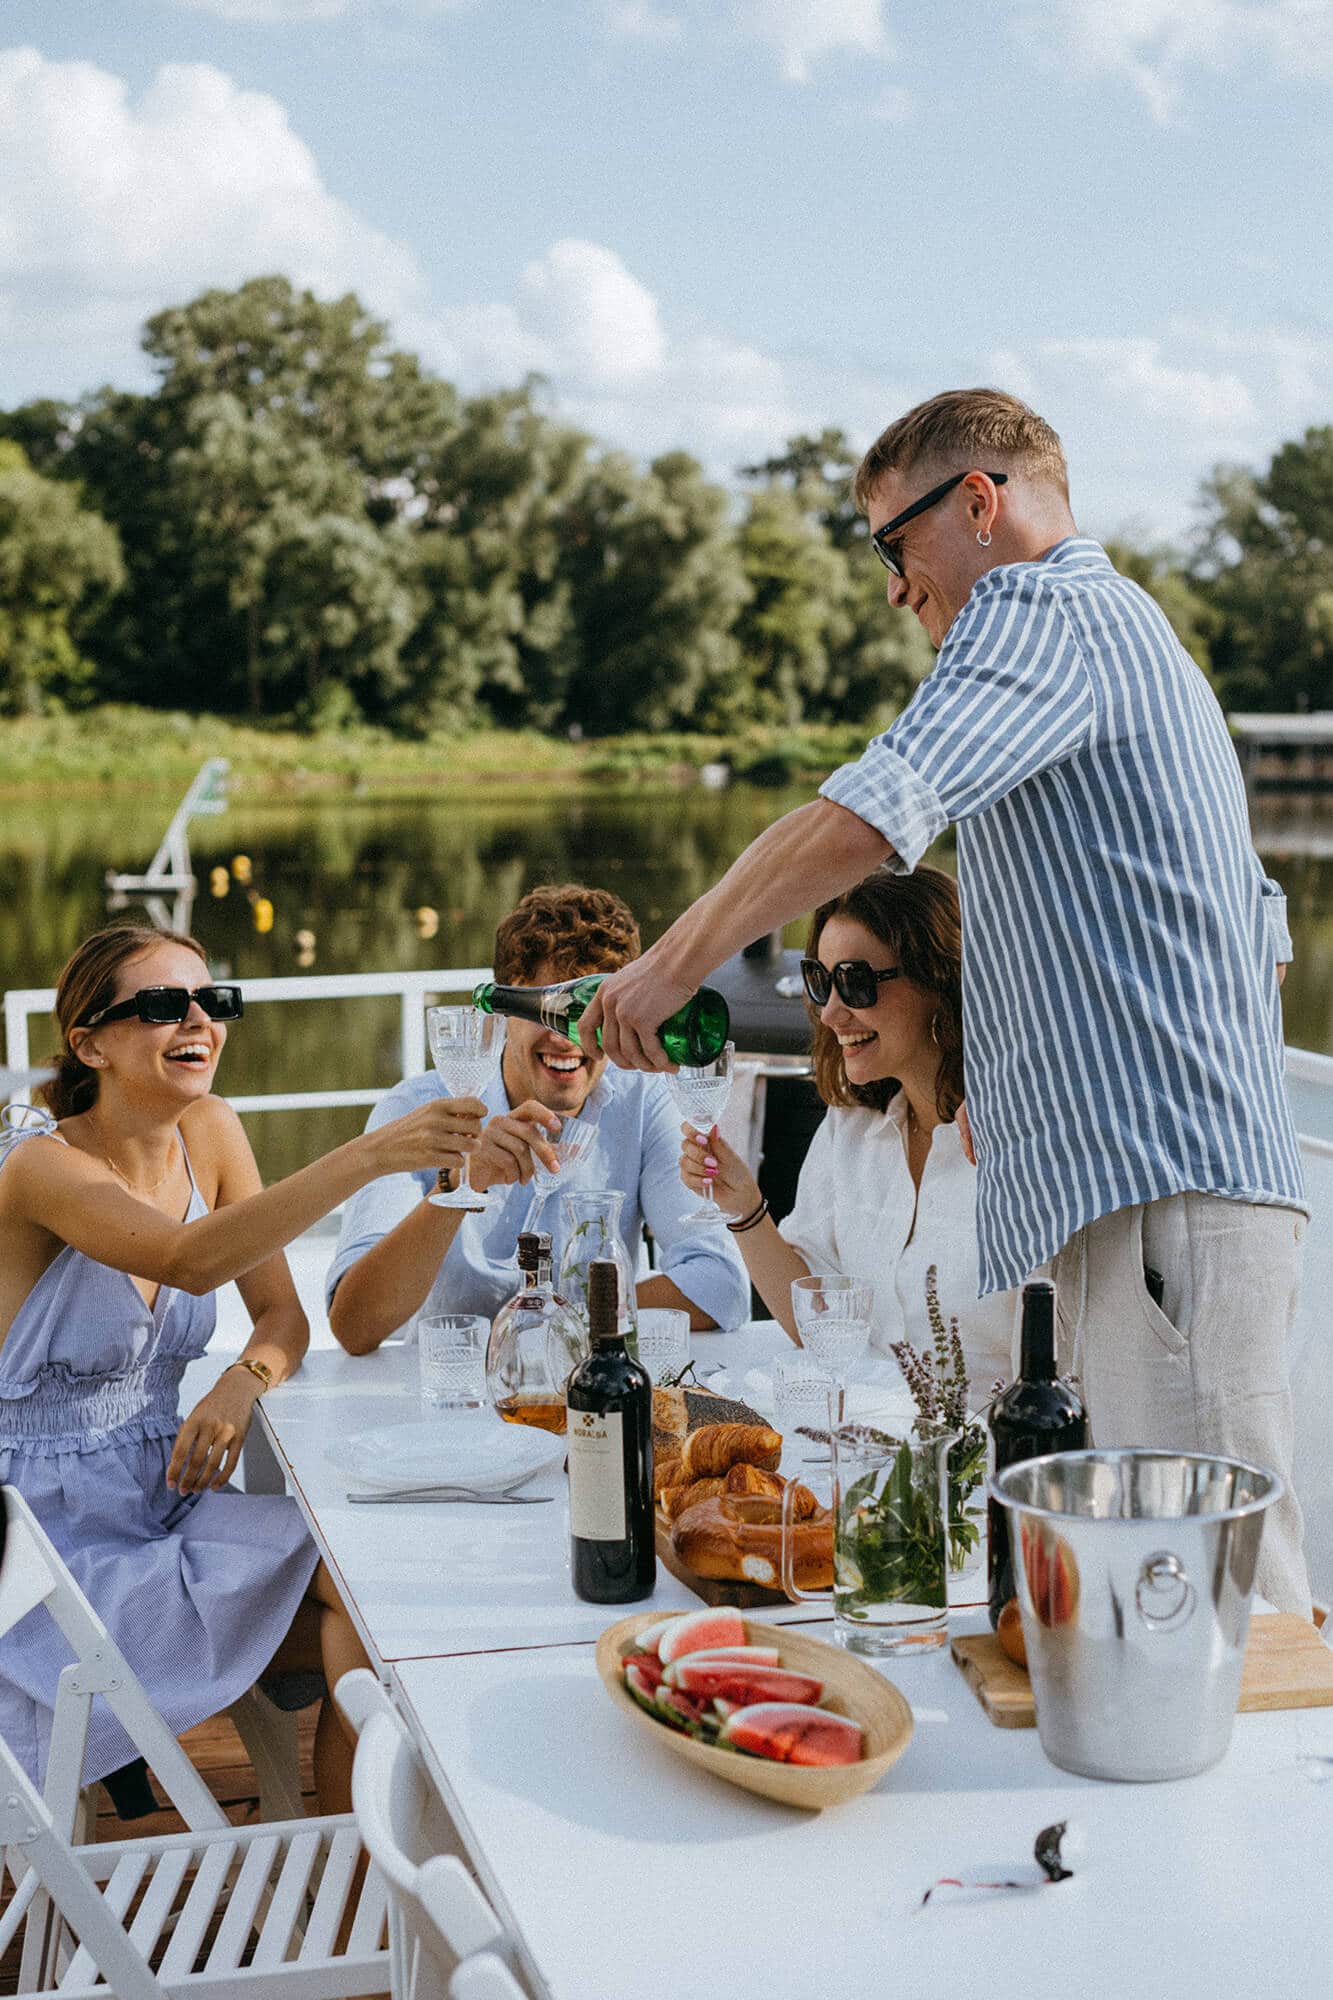 Four celebratory people drinking wine on a dock depicting the vibrant lifestyle at Flora apartments in summerville sc - pexels koolshooters 9750952